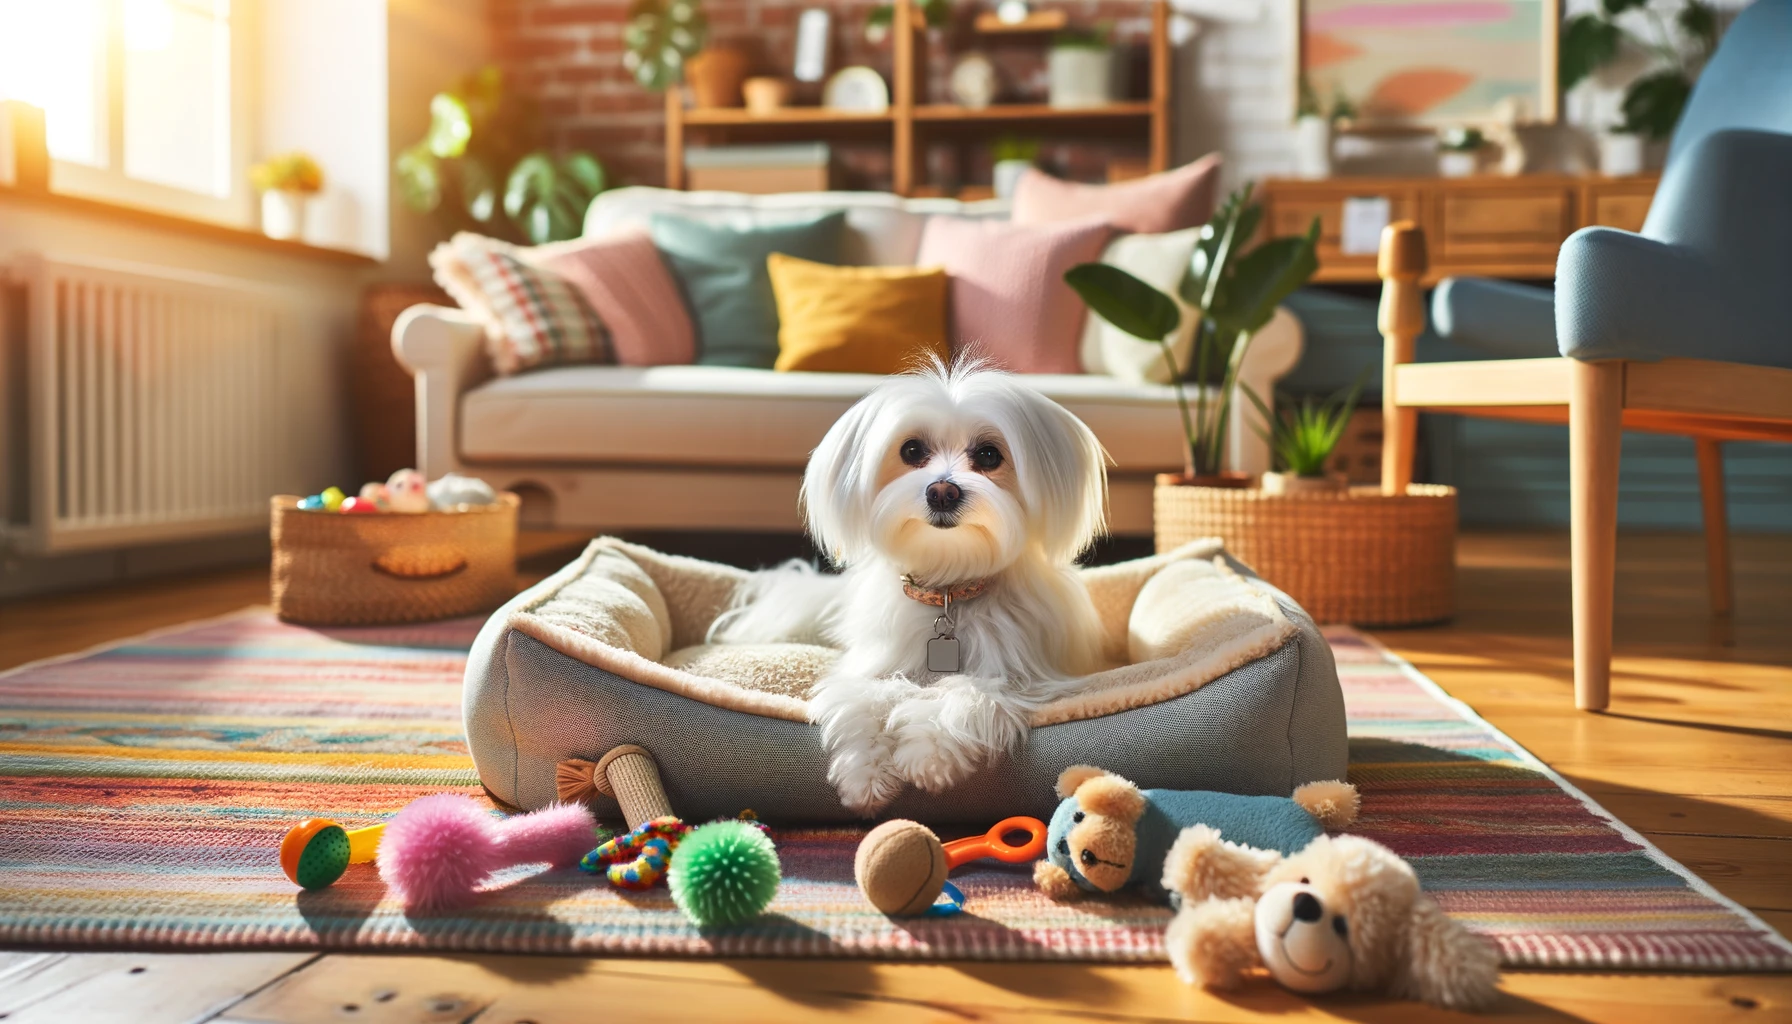 a maltese sitting in a dog bed surrounded by dog toys